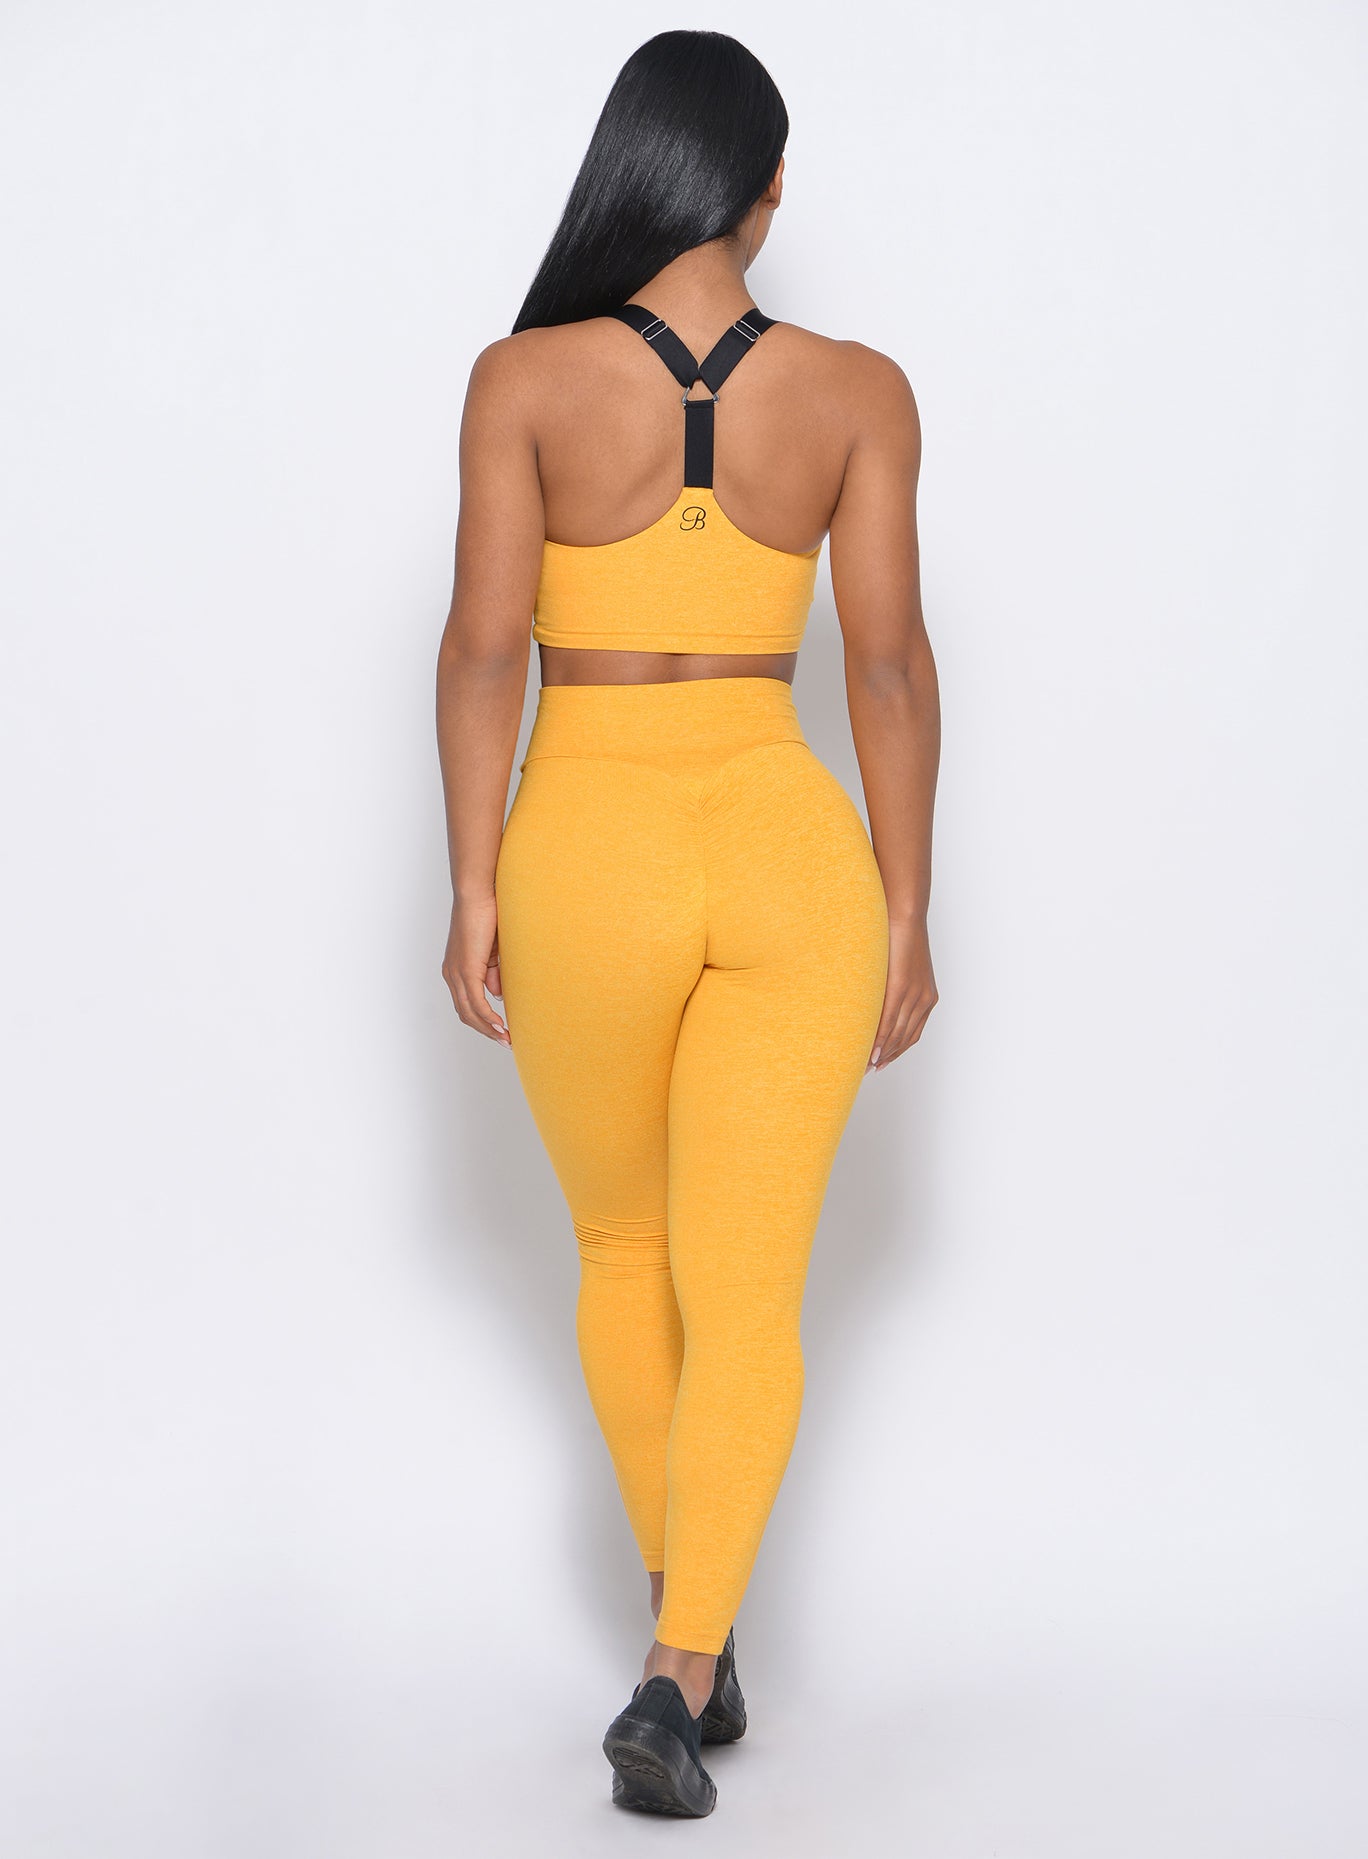 Back profile view of the model wearing our boost leggings in sunkissed color and a matching bra